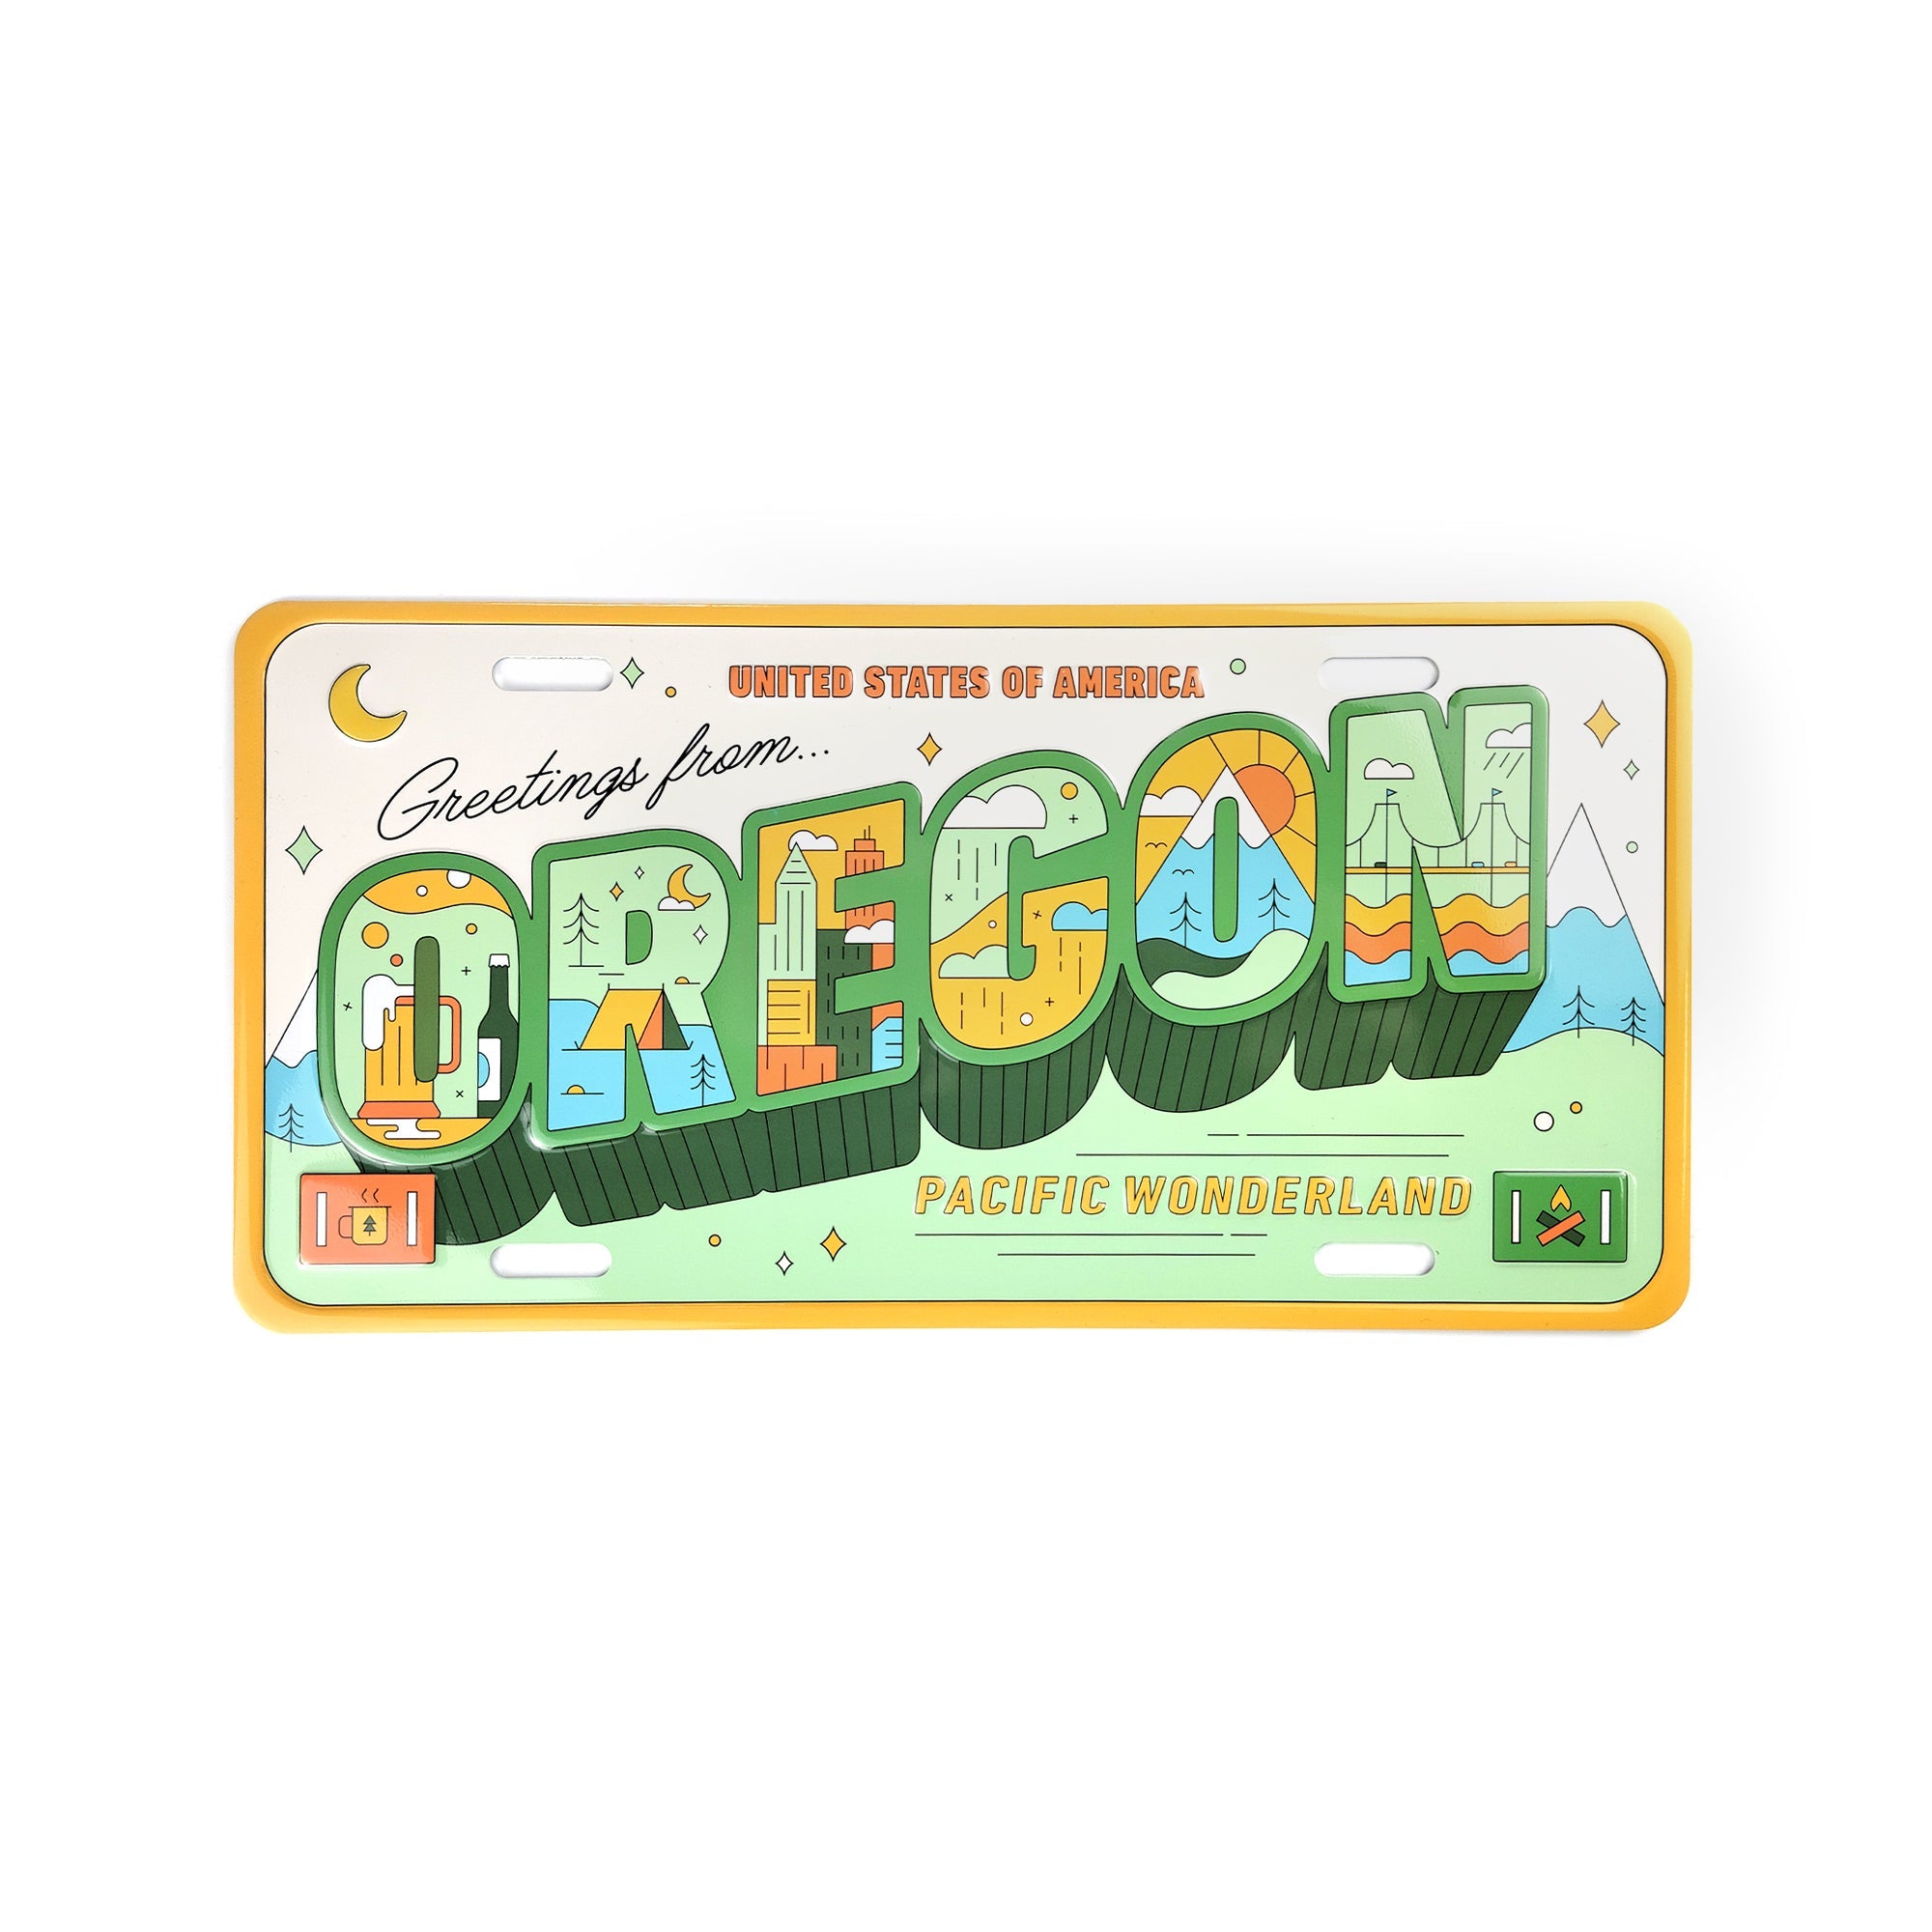 Greetings From Oregon Souvenir License Plate - Gifts - Hello From Portland